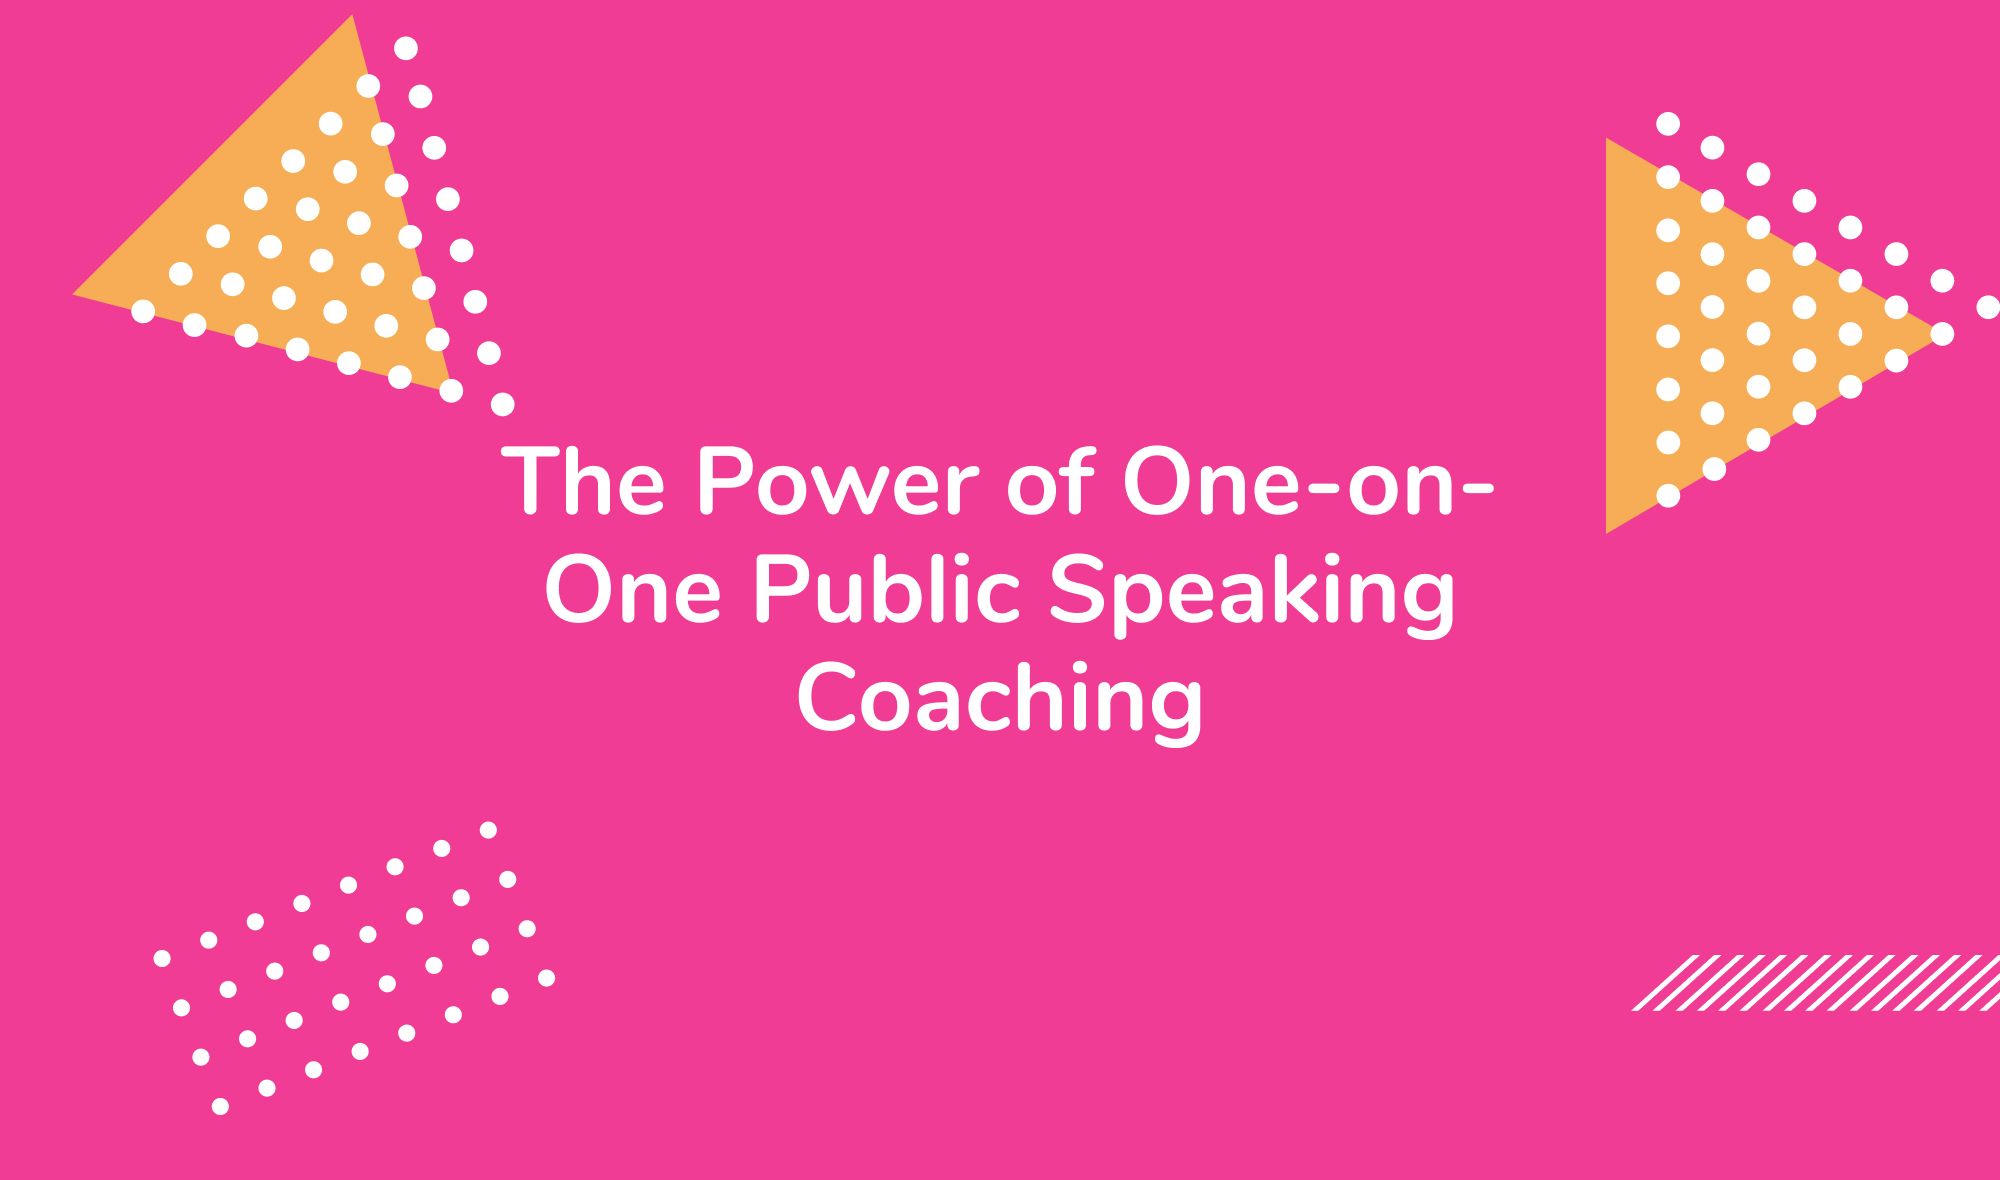 The Power of One-on-One Public Speaking Coaching